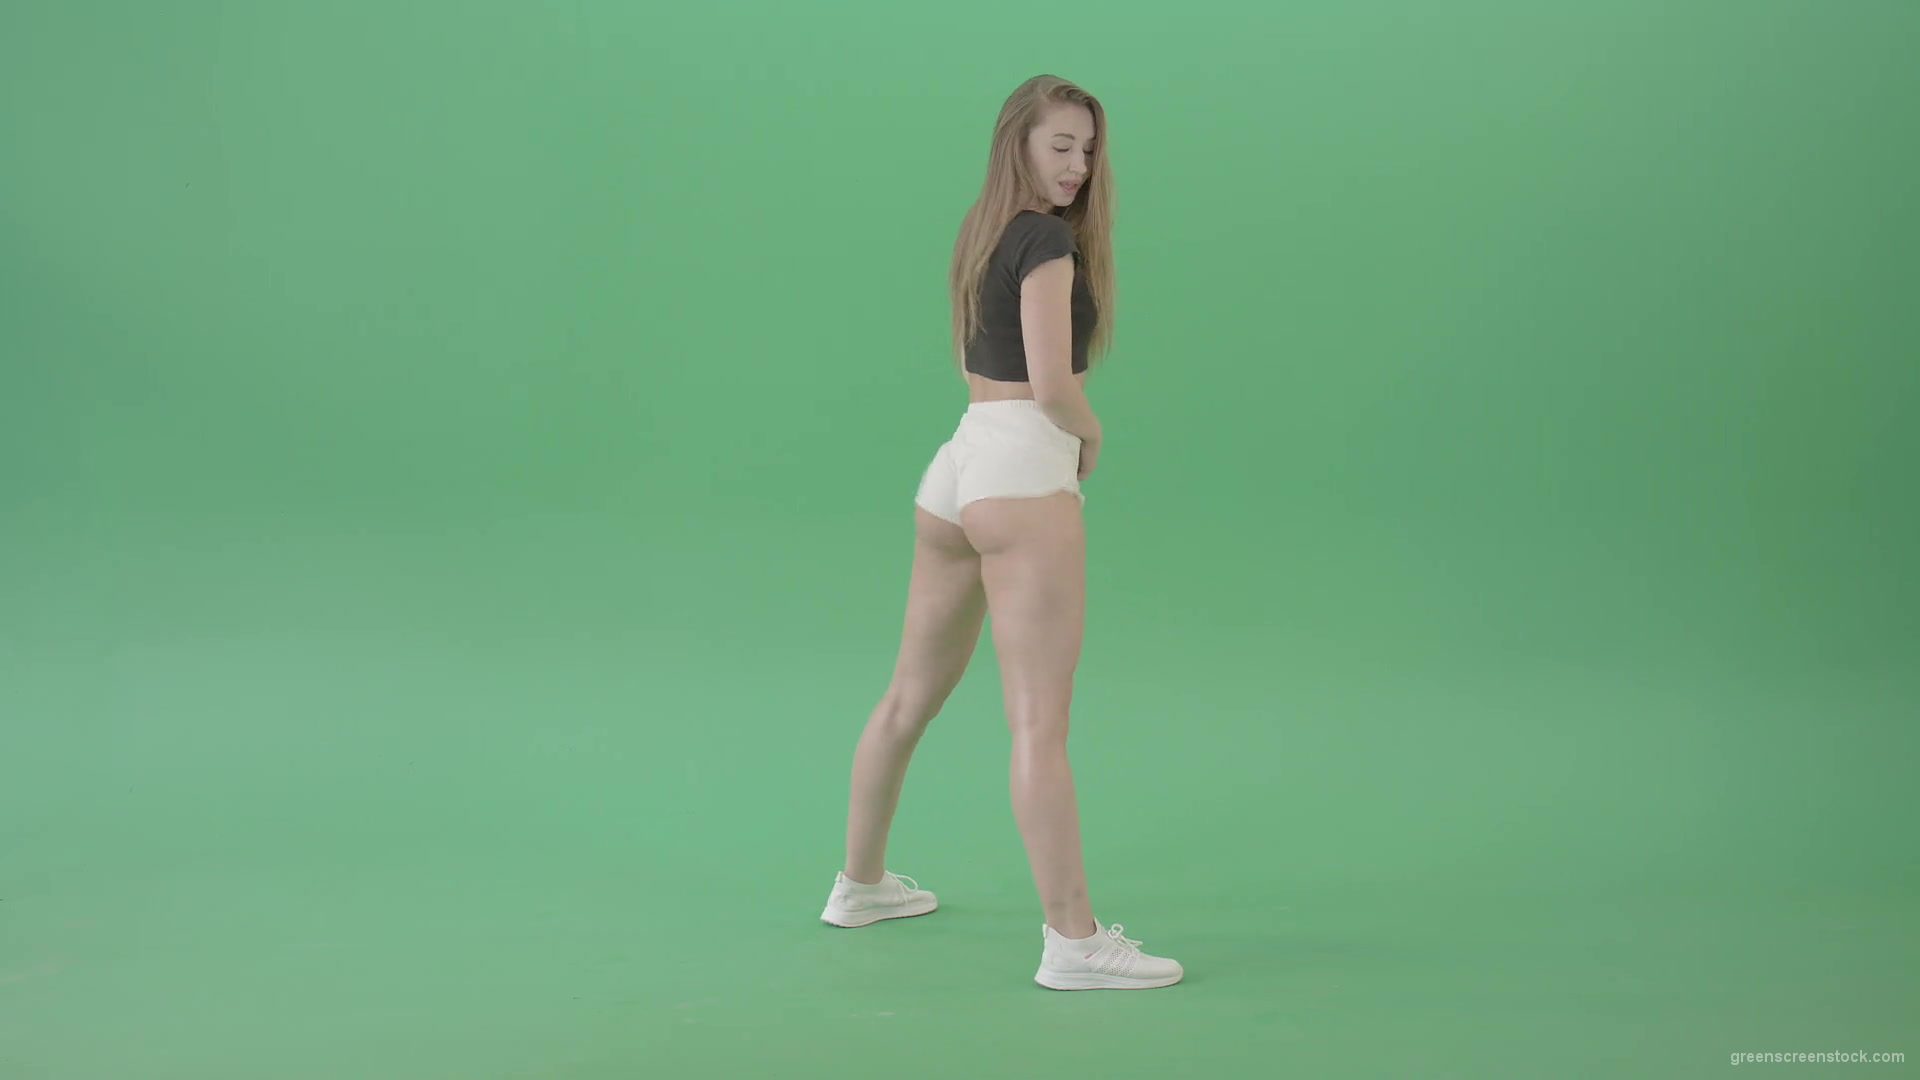 Amazing-young-woman-shaking-ass-in-side-view-twerking-dance-over-green-screen-4K-Video-Footage-1920_004 Green Screen Stock